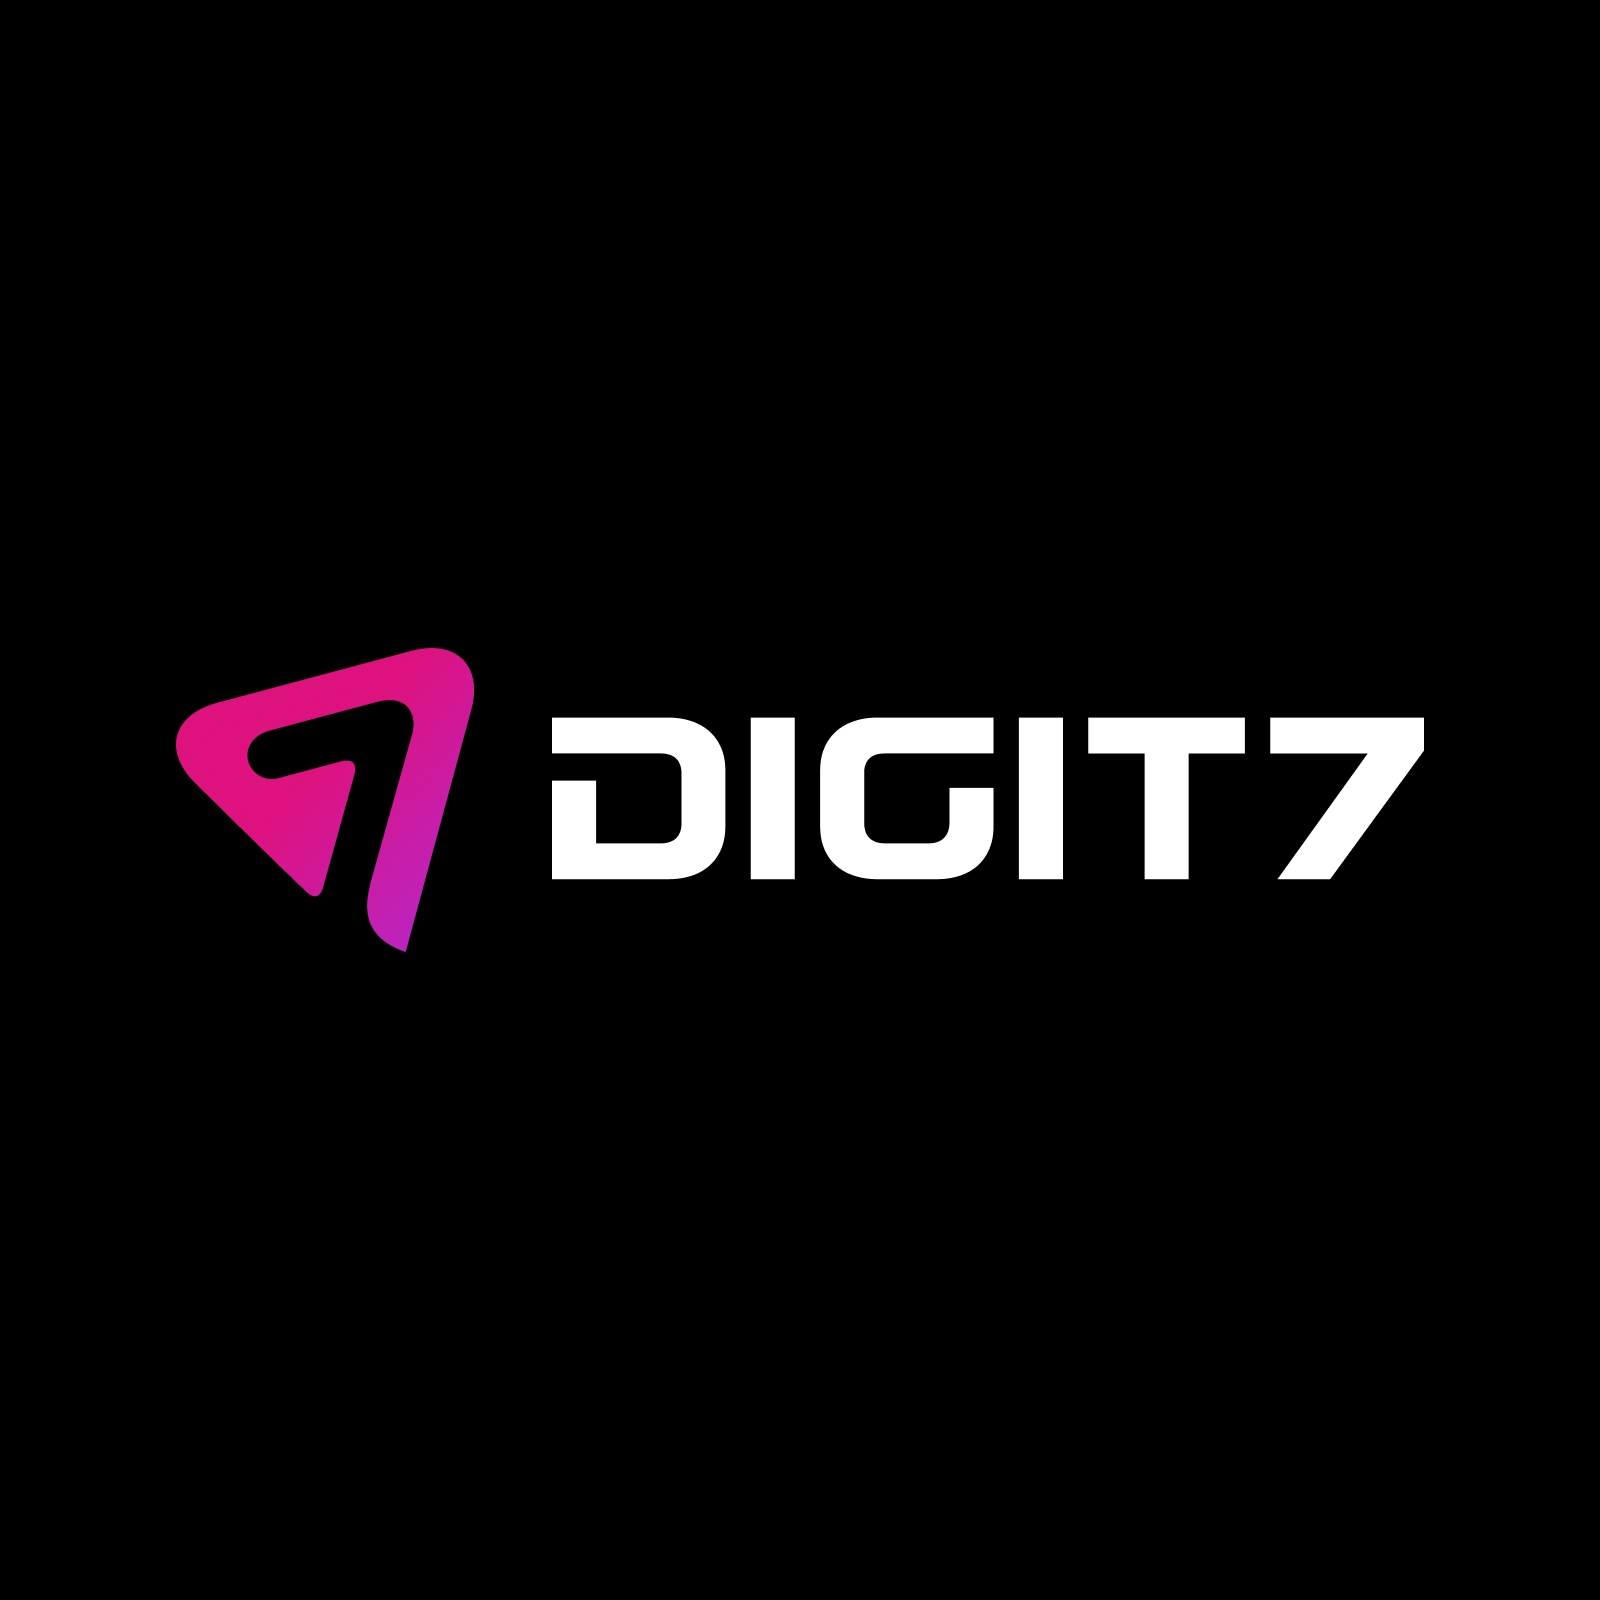 Digit7's website is a true reflection of its tech innovation